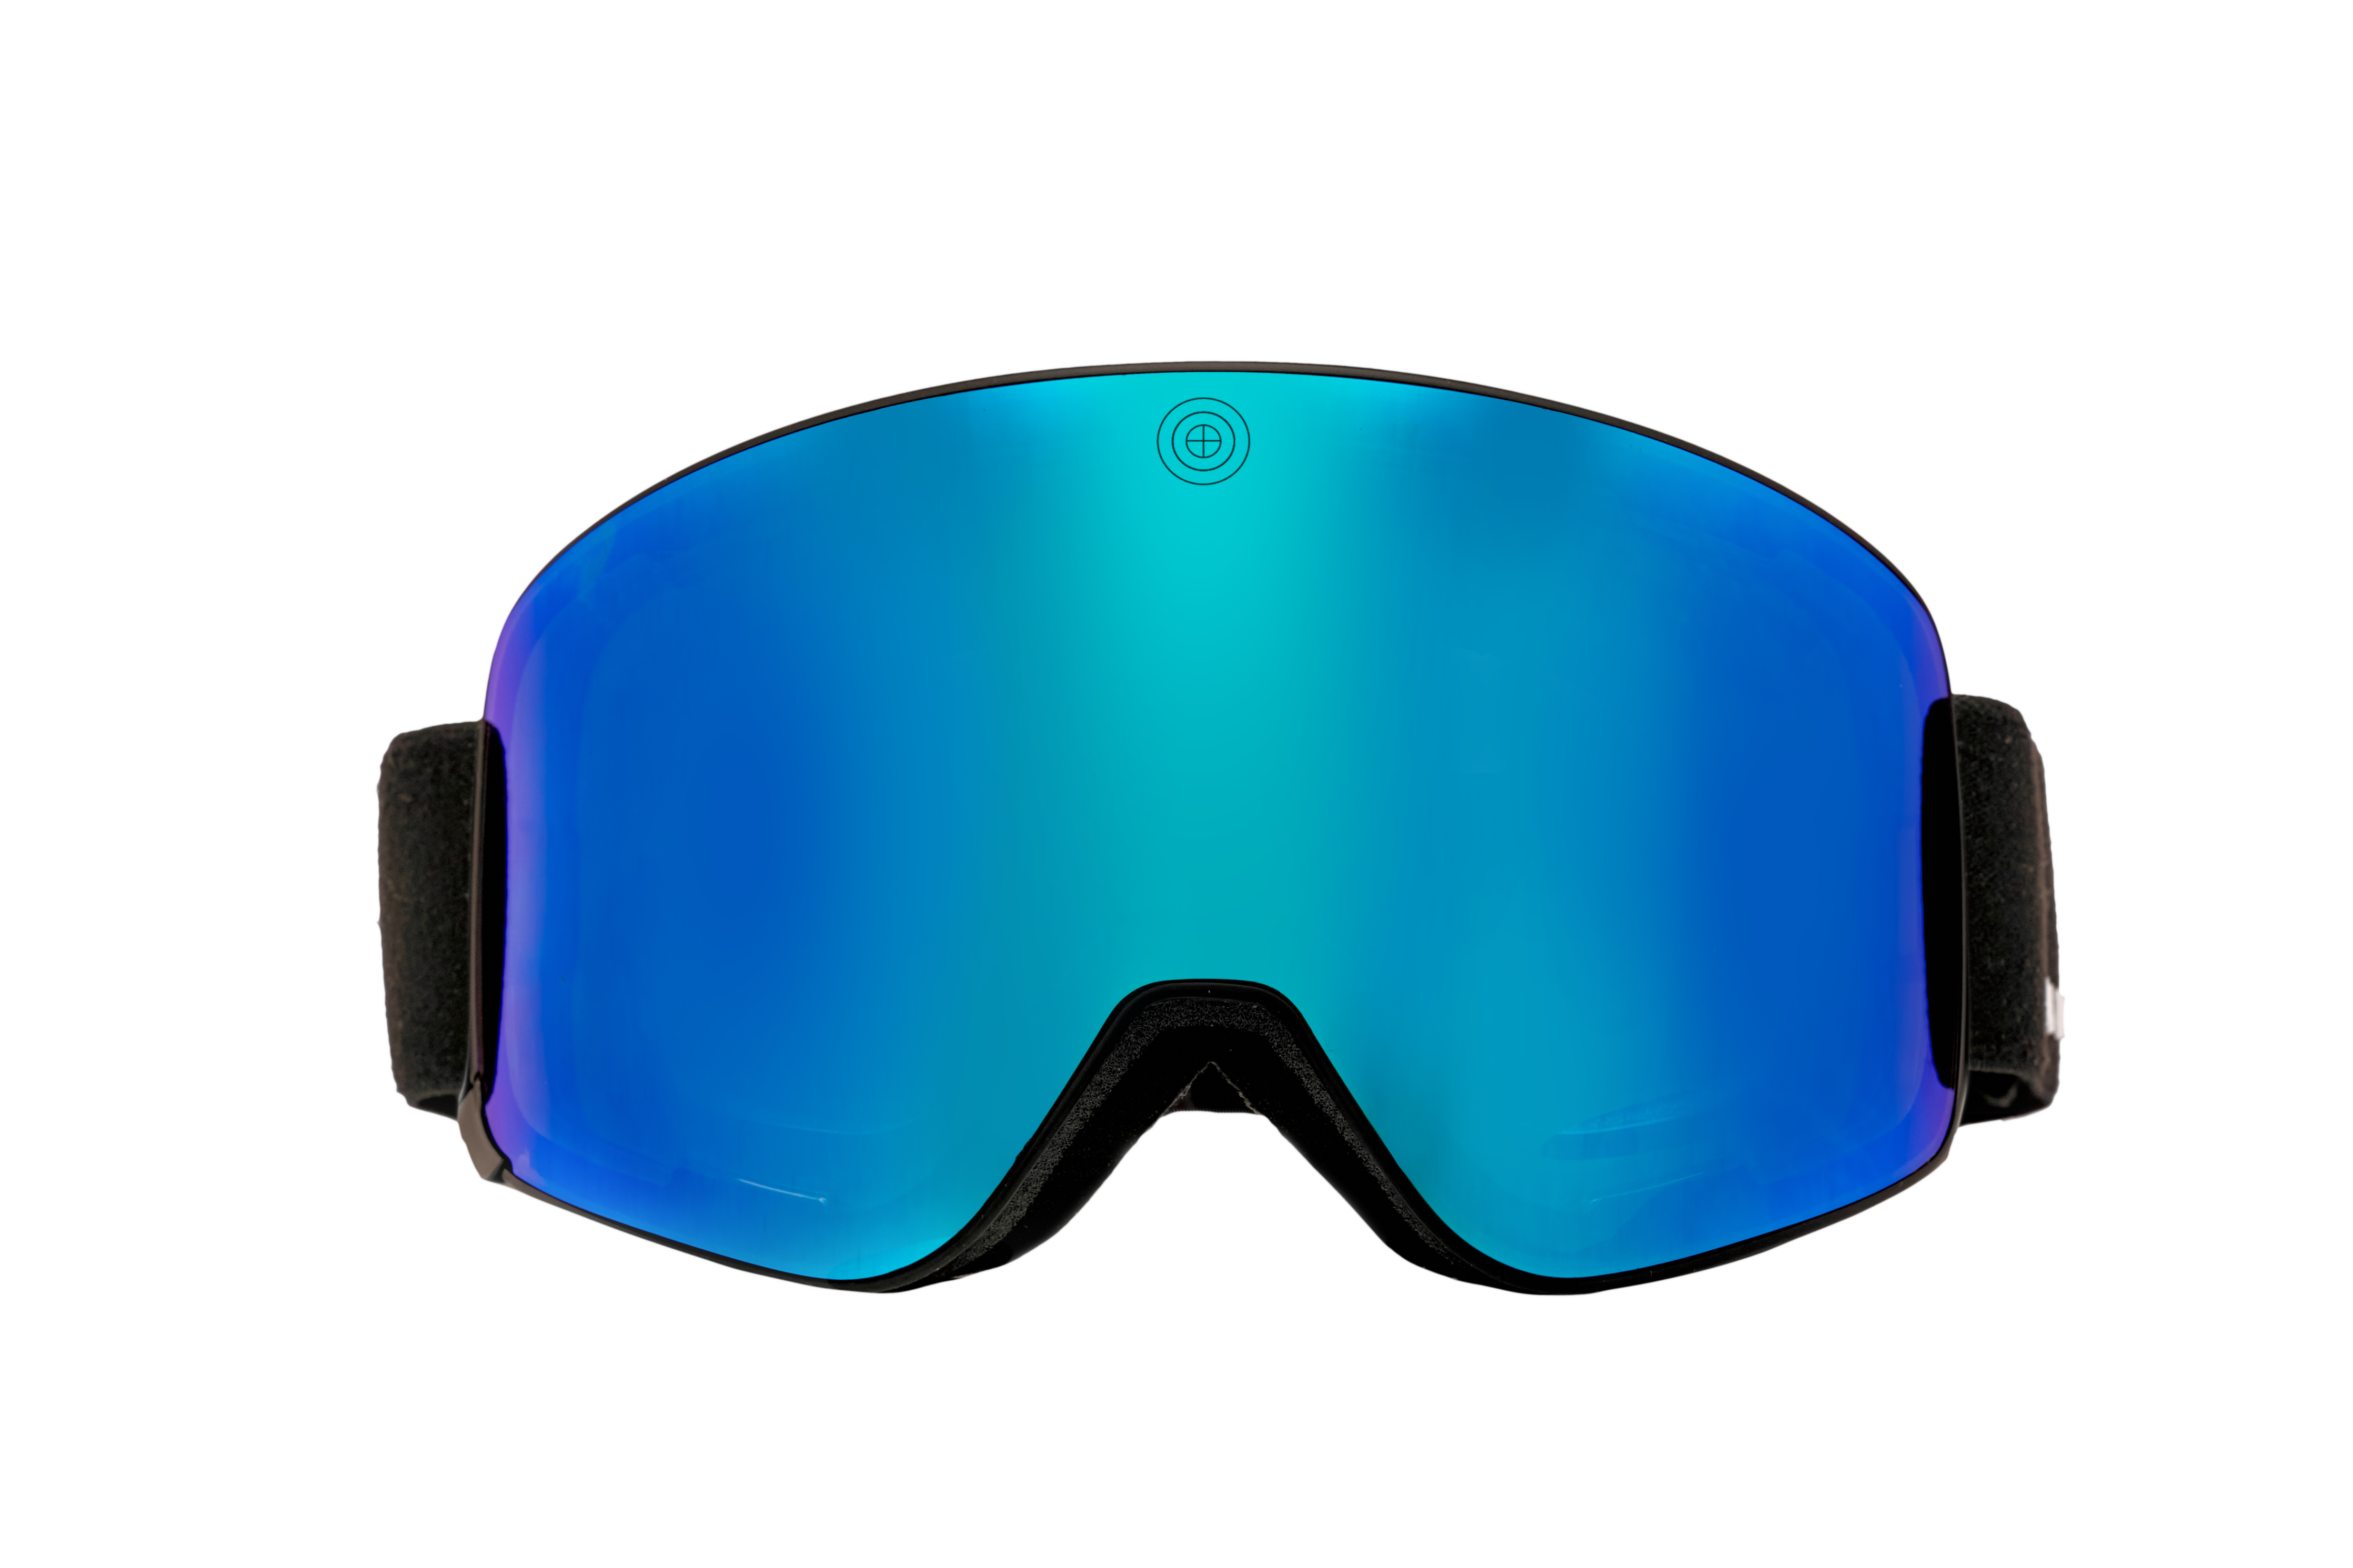 Ski goggle strap design, Other clothing or merchandise contest